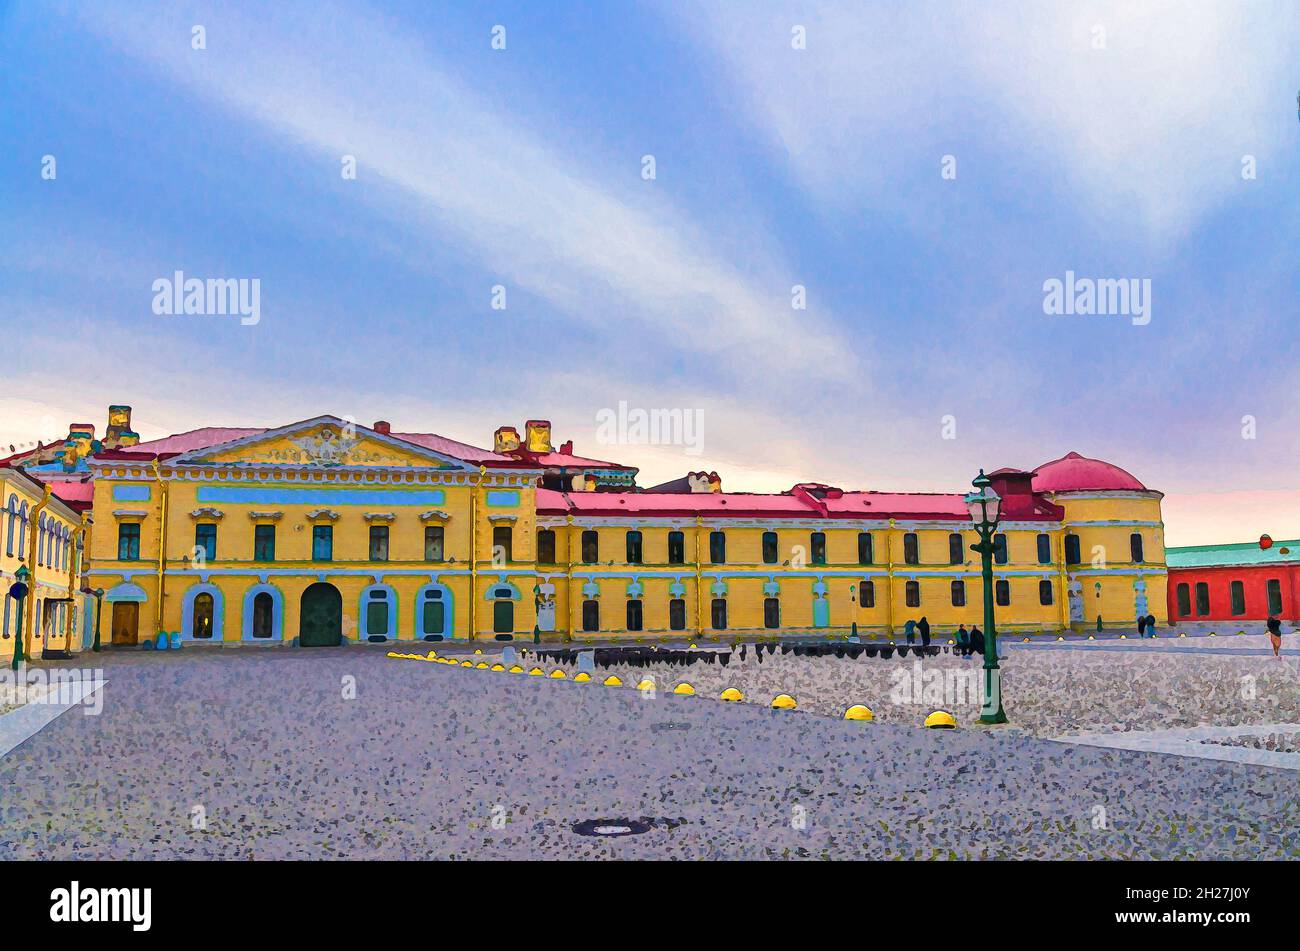 Watercolor drawing of Saint Petersburg Mint in Peter and Paul Fortress citadel on Zayachy Hare Island, evening dusk twilight view, Leningrad city, Rus Stock Photo